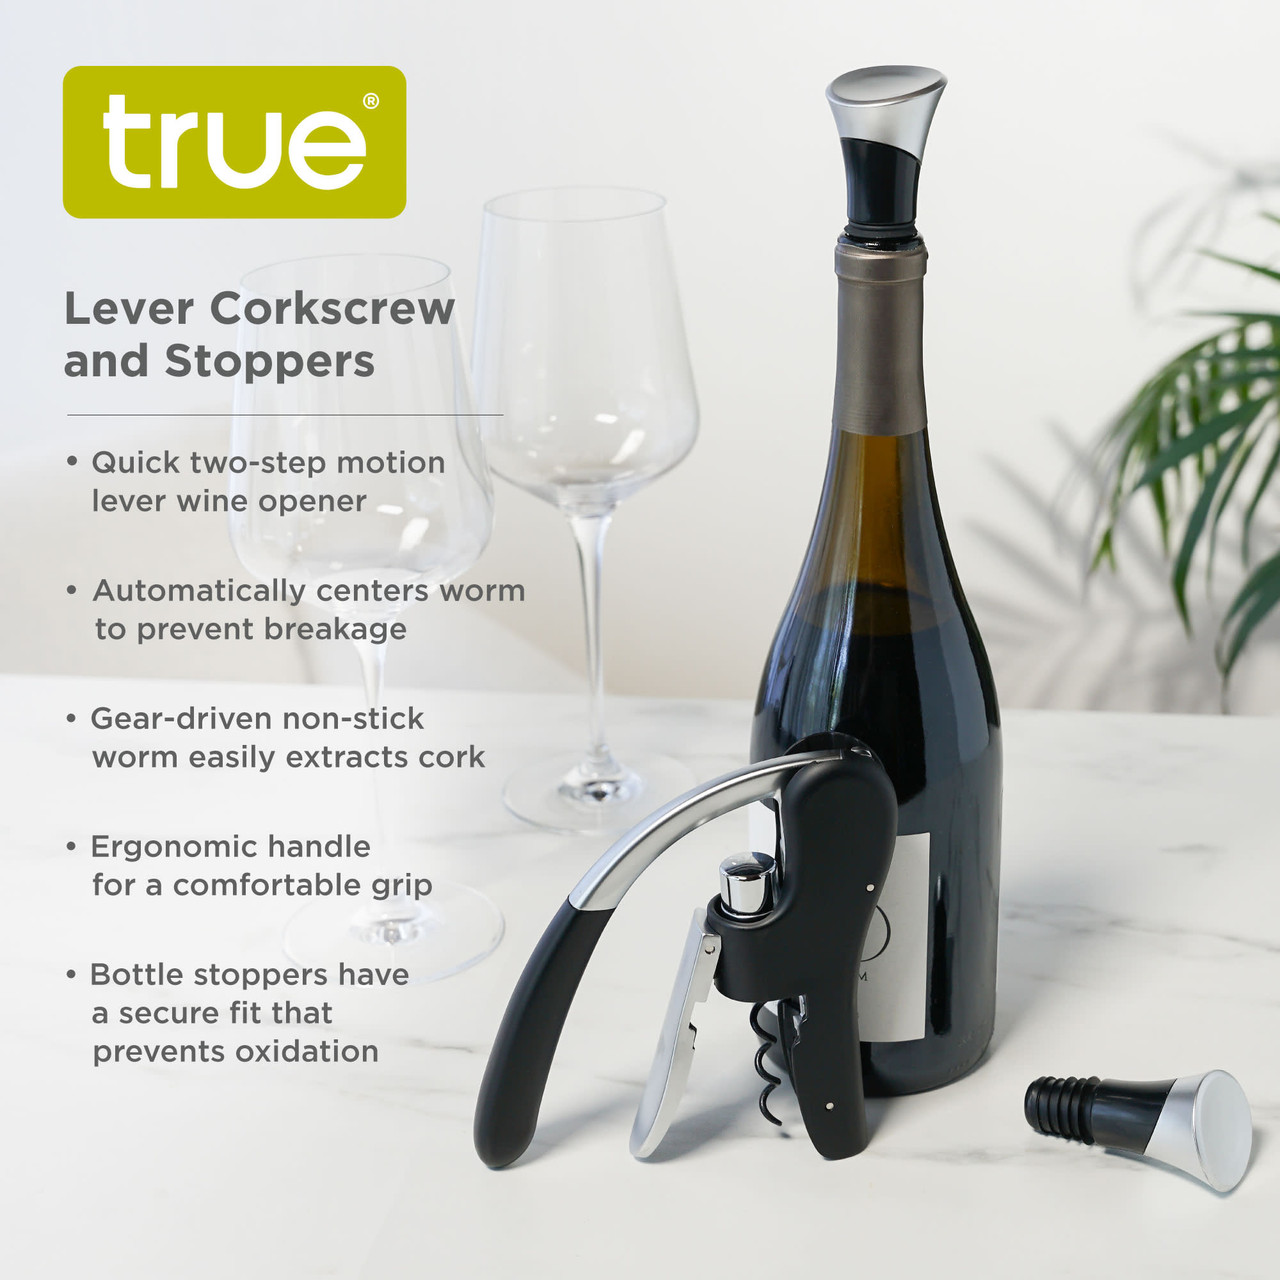 Lever Corkscrew and Stoppers, Set of 3 in SIOC pkg by True